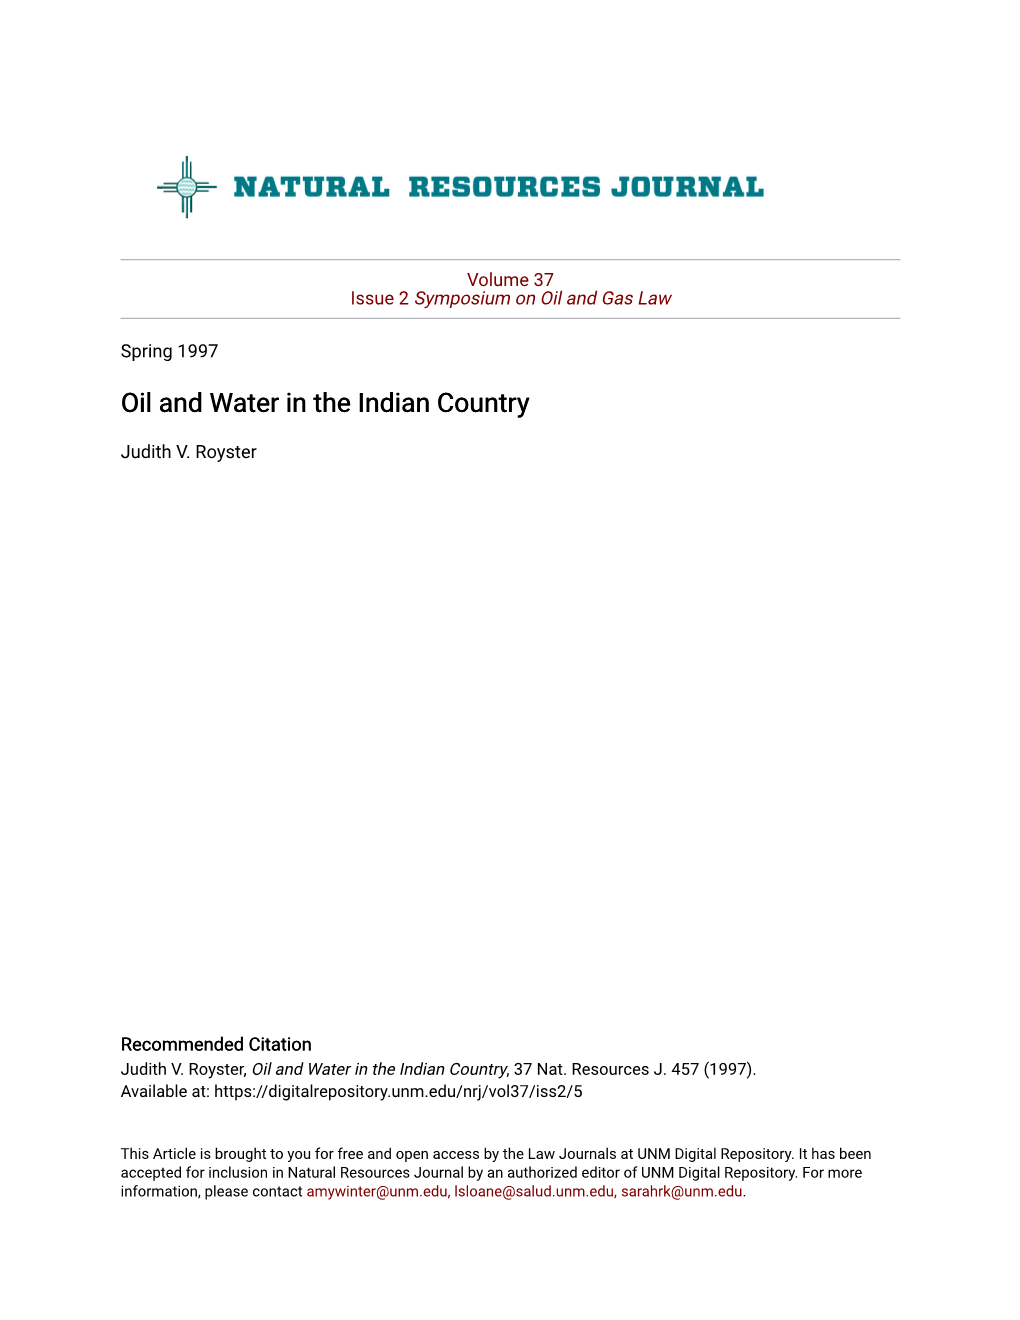 Oil and Water in the Indian Country